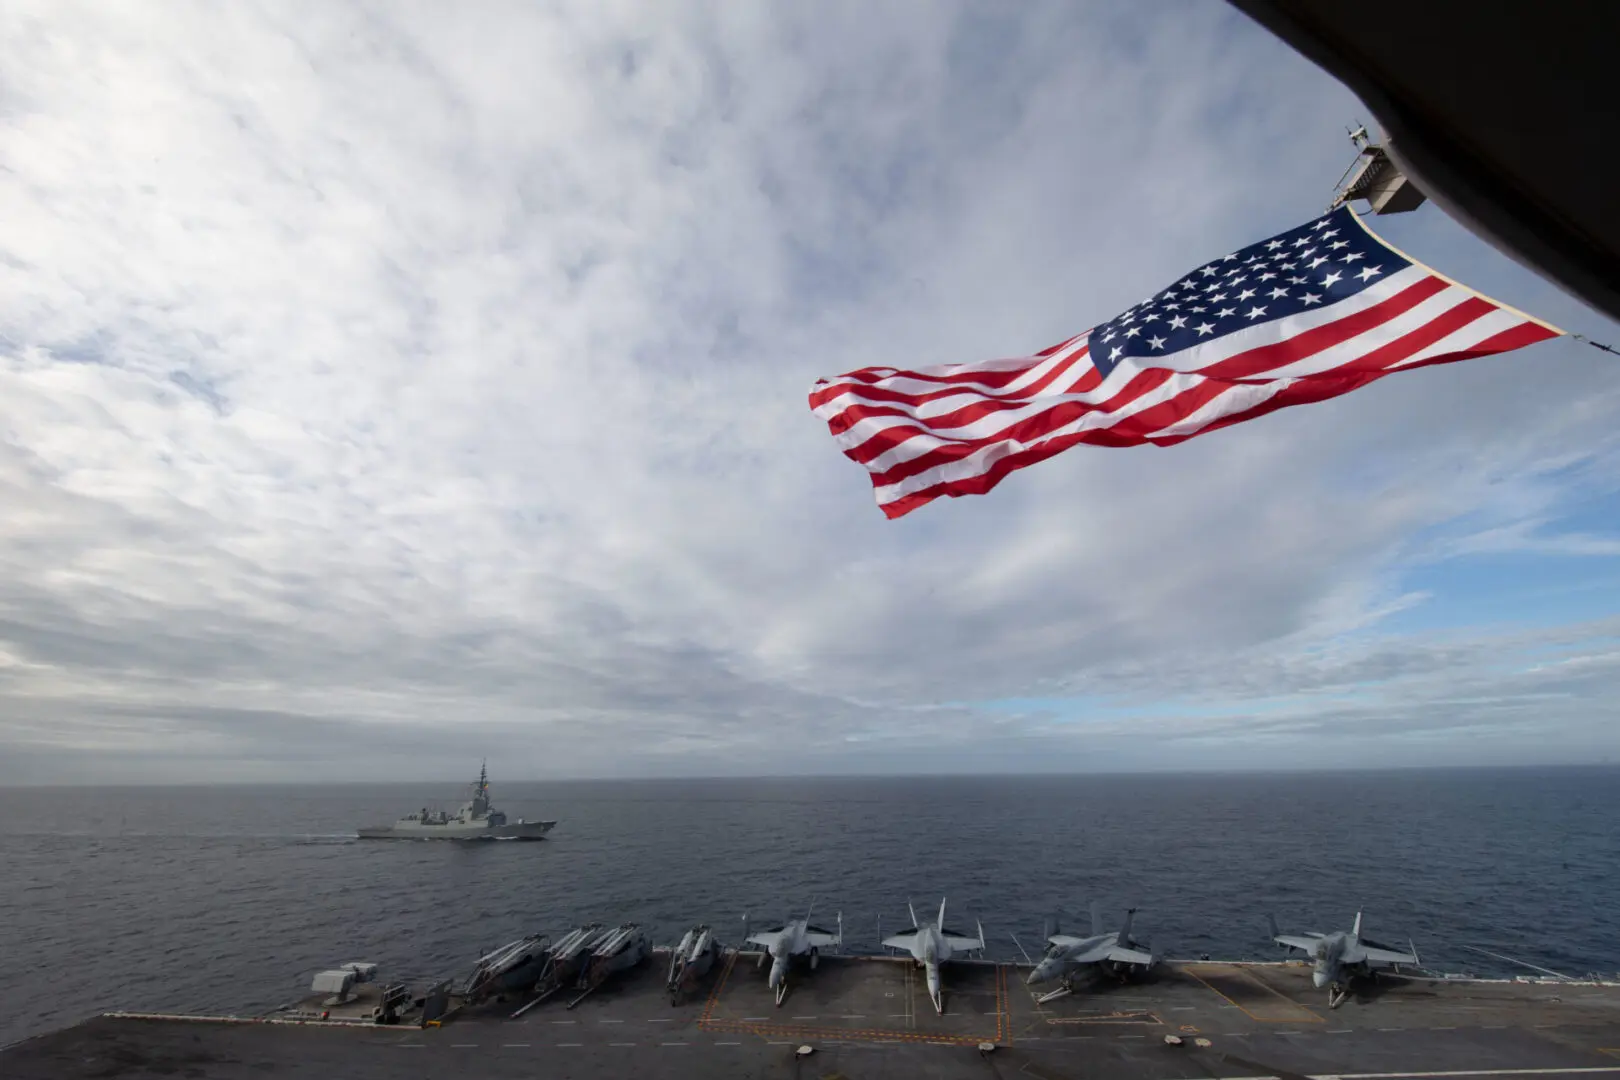 ATLANTIC OCEAN (Oct. 25, 2022) The first-in-class aircraft carrier USS Gerald R. Ford (CVN 78) flies the holiday American Flag while steaming in formation with Spanish Armada frigate Álvaro de Bazán (F 101), Oct. 25, 2022. The Gerald R. Ford Carrier Strike Group (GRFCSG) is deployed in the Atlantic Ocean, conducting training and operations alongside NATO Allies and partners to enhance integration for future operations and demonstrate the U.S. Navy’s commitment to a peaceful, stable and conflict-free Atlantic region. (U.S. Navy photo by Mass Communication Specialist 2nd Class Zack Guth)